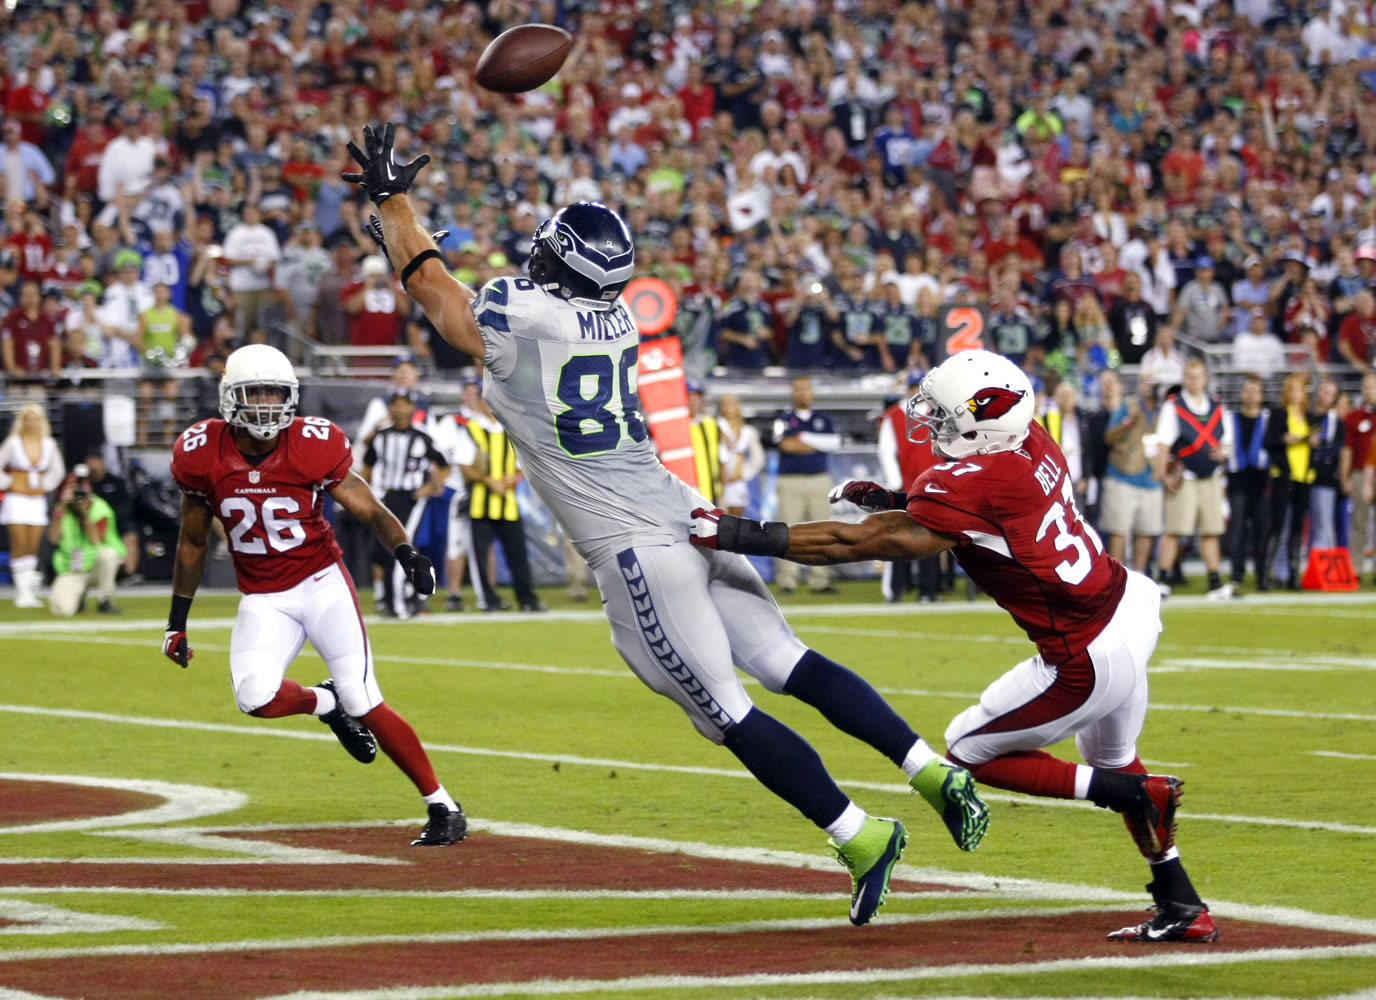 Seattle Seahawks tight end Zach Miller (86) pulls in a touchdown pass as Arizona Cardinals strong safety Yeremiah Bell (37) and Rashad Johnson (26) defend during the first half on Thursday, Oct. 17, 2013, in Glendale, Ariz.